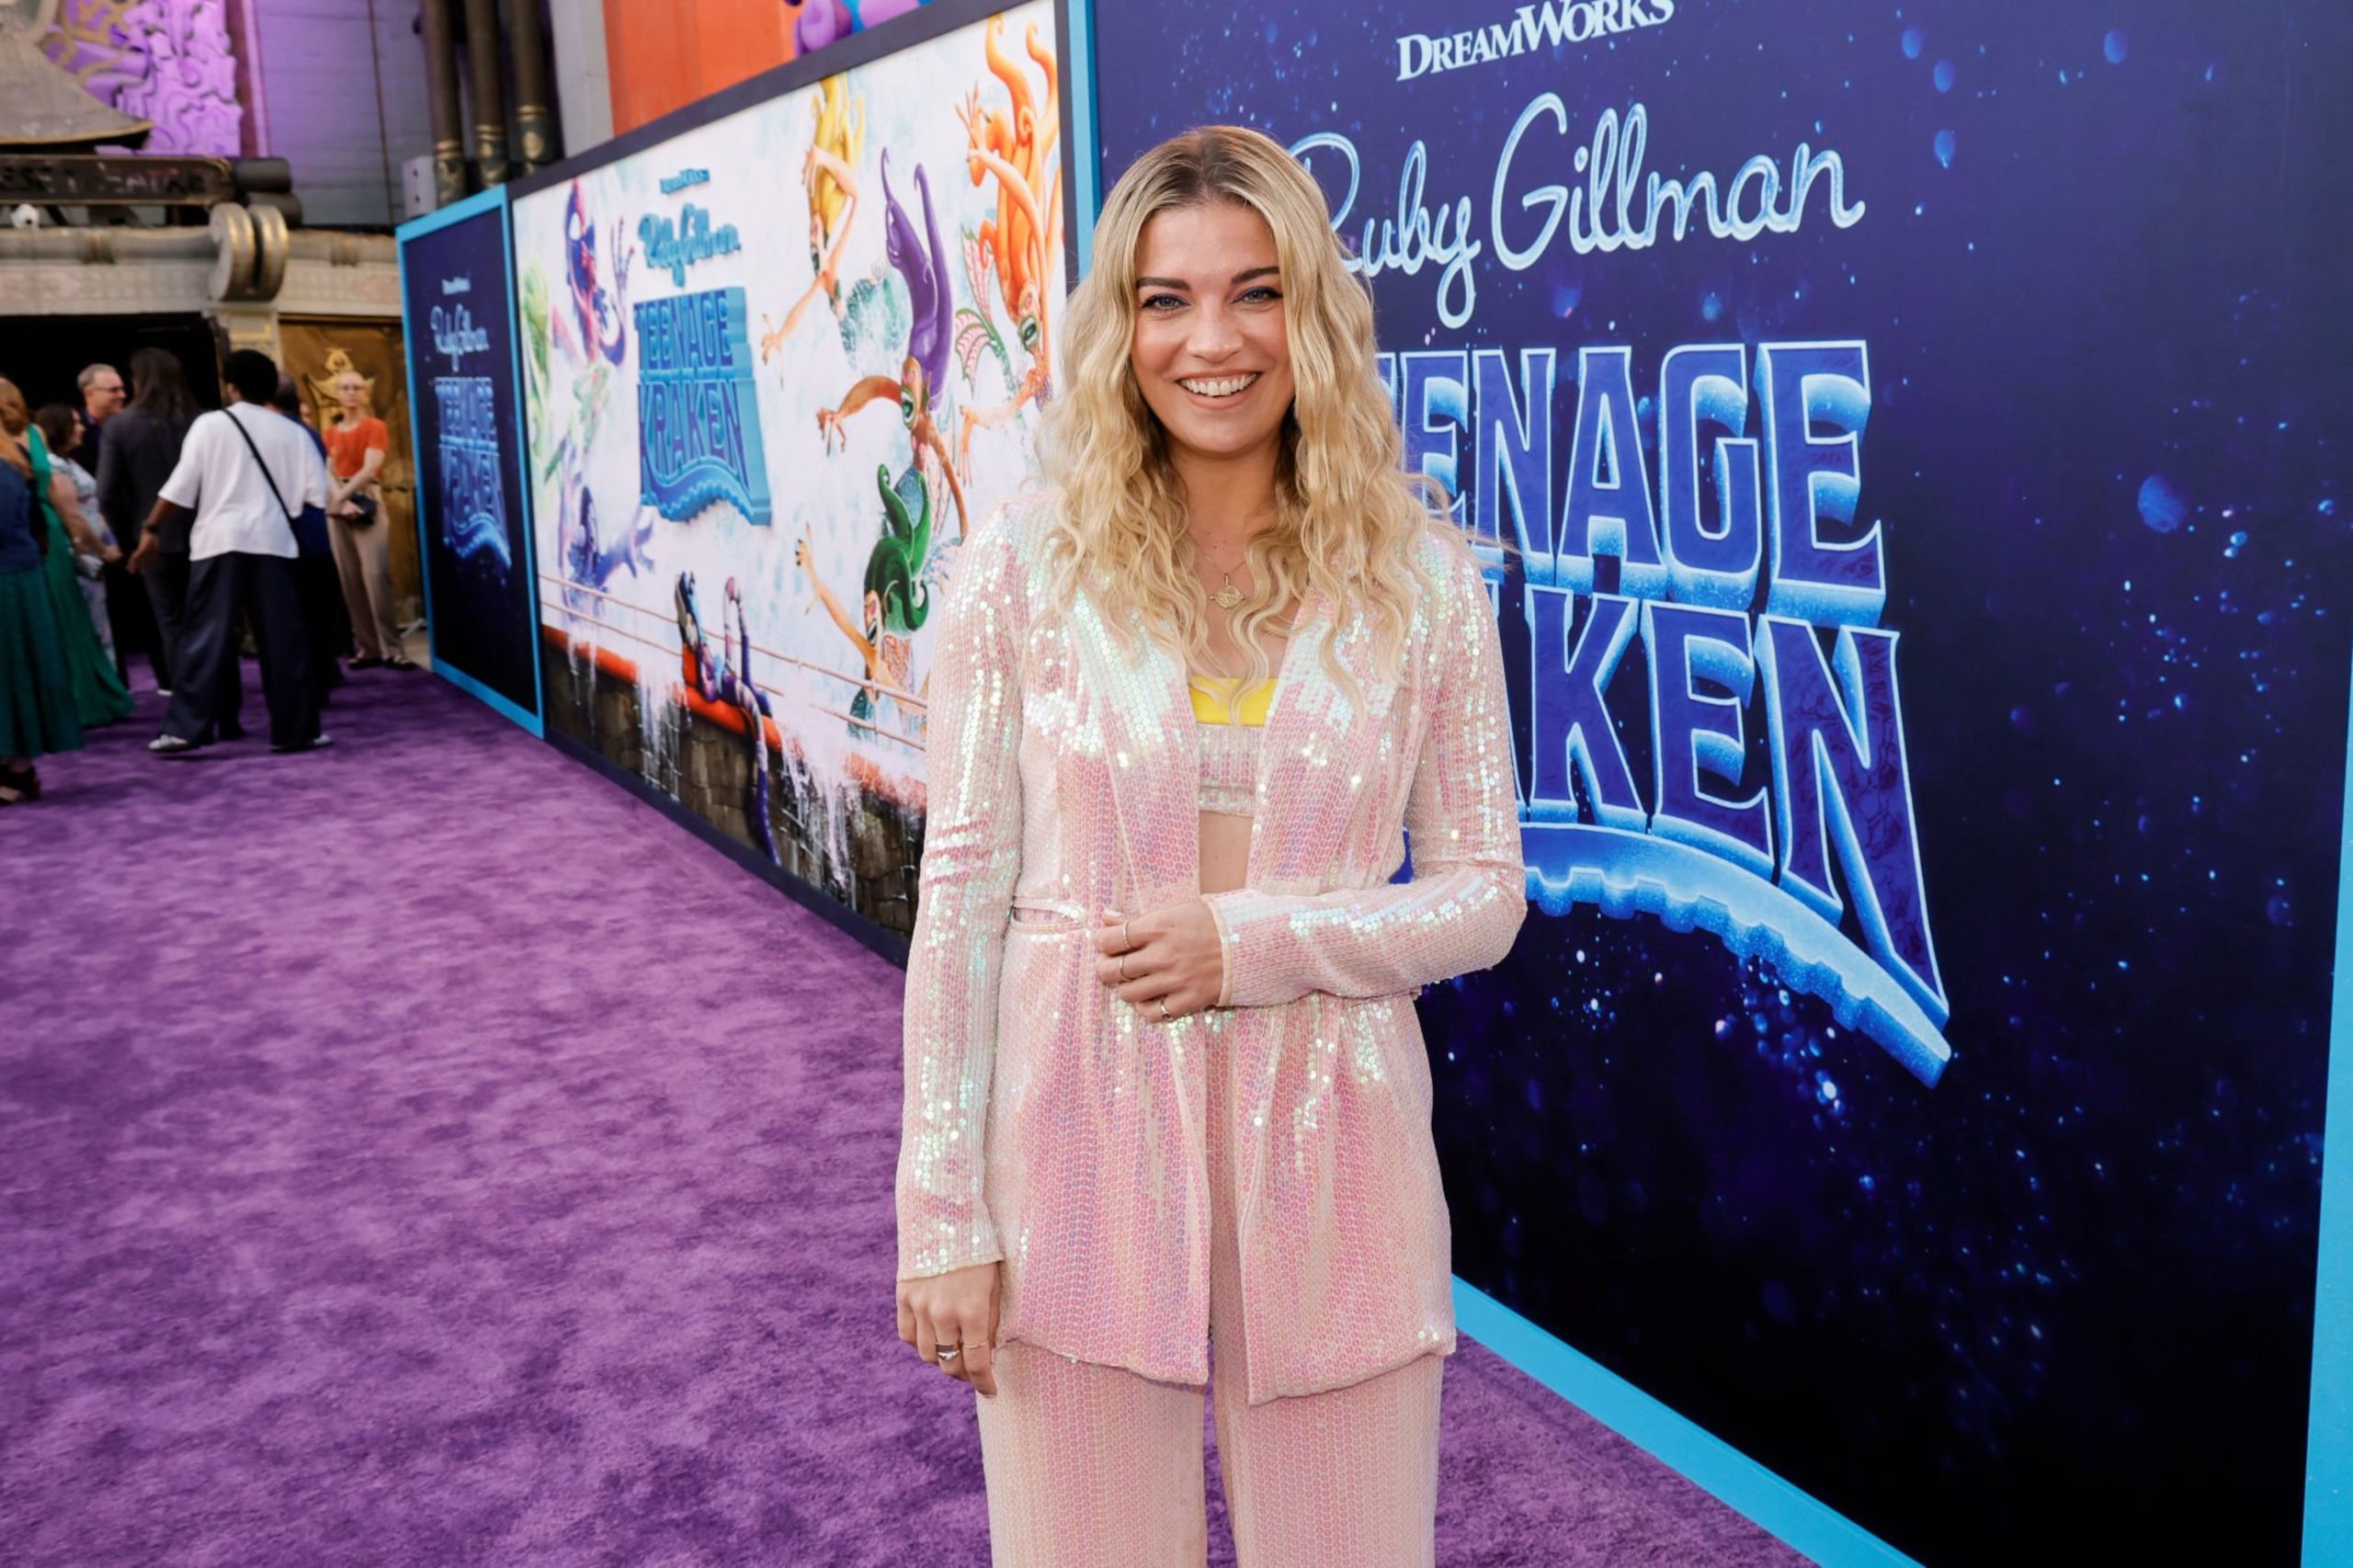 Annie Murphy at the premiere of "Ruby Gillman, Teenage Kraken" held at TCL Chinese Theatre on June 28, 2023 in Los Angeles, California.